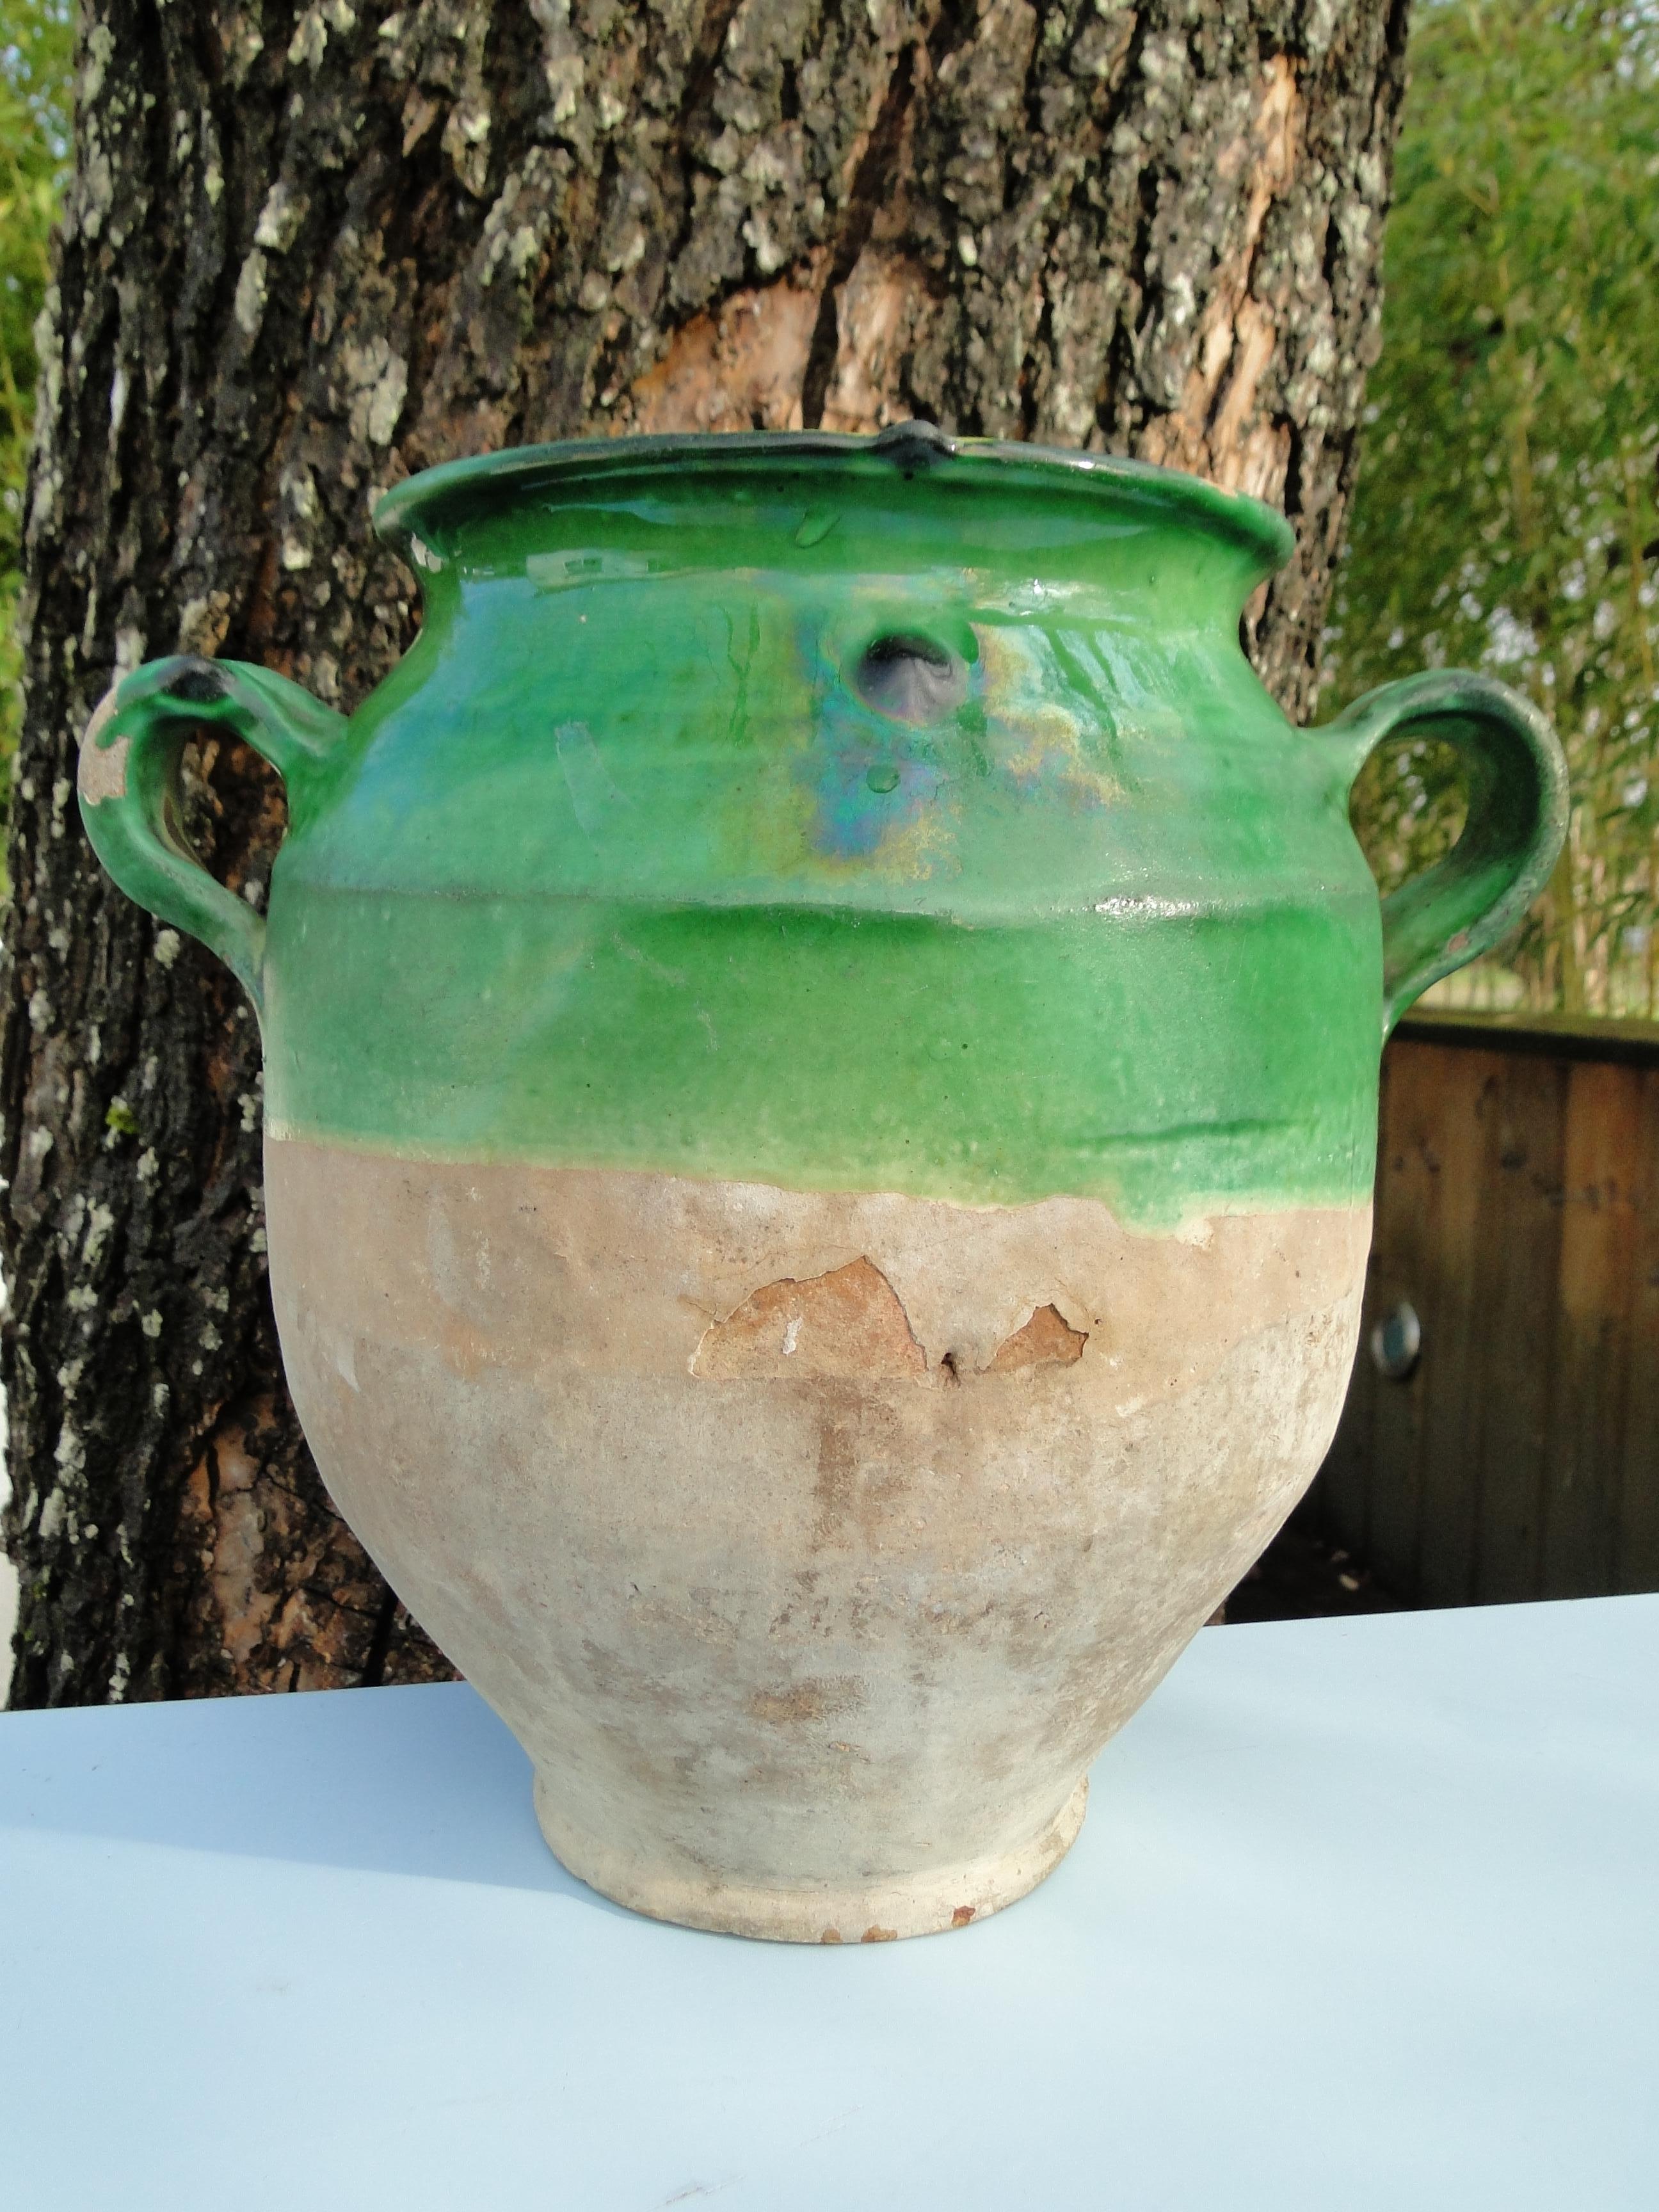 A rustic French confit pot from the late nineteenth / early twentieth-century.

Originally used for storing preserves.

This would make a lovely addition to a collection of antique pottery.

Condition and wear consistent with age and use.

Good